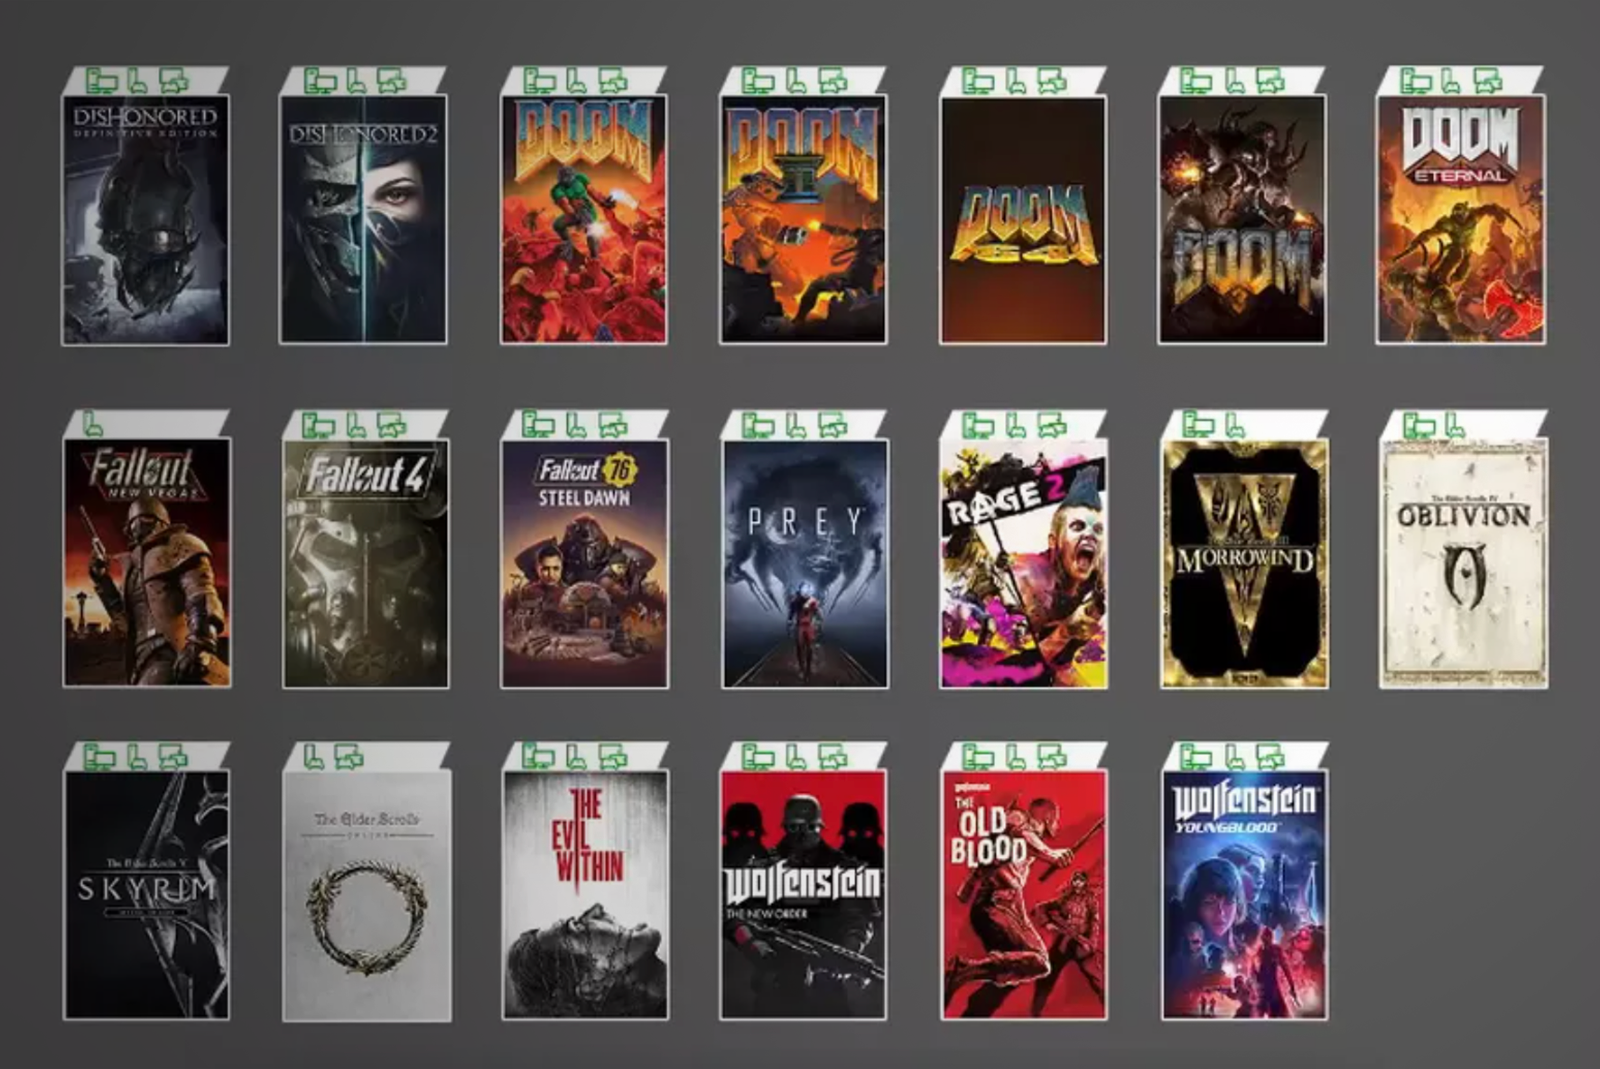 20 Bethesda games will be available on Xbox Game Pass Friday - The Verge